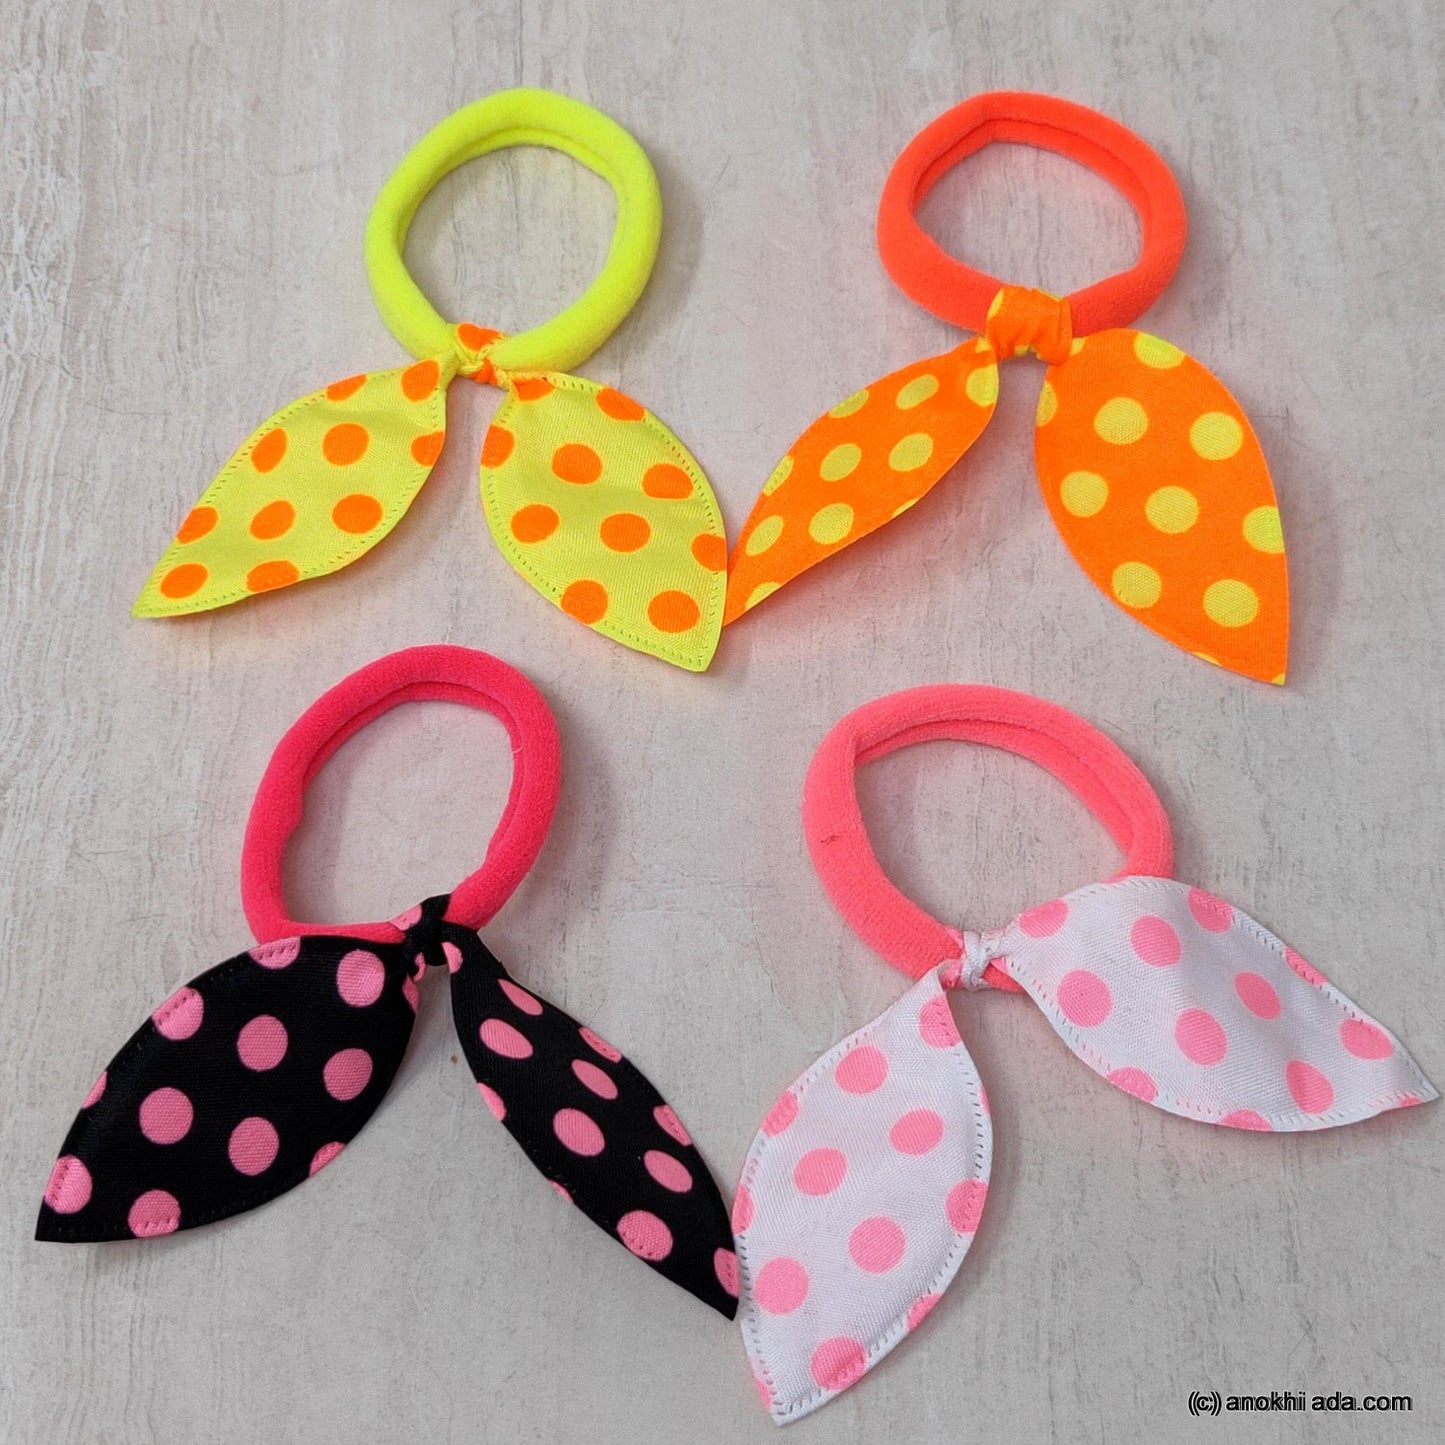 Anokhi Ada Polka Dot Print Hair Ties/ Hairbands for Girls and Women (ZG-40 Ponytail Holders, 4 Pcs Assorted Colour Rubber)